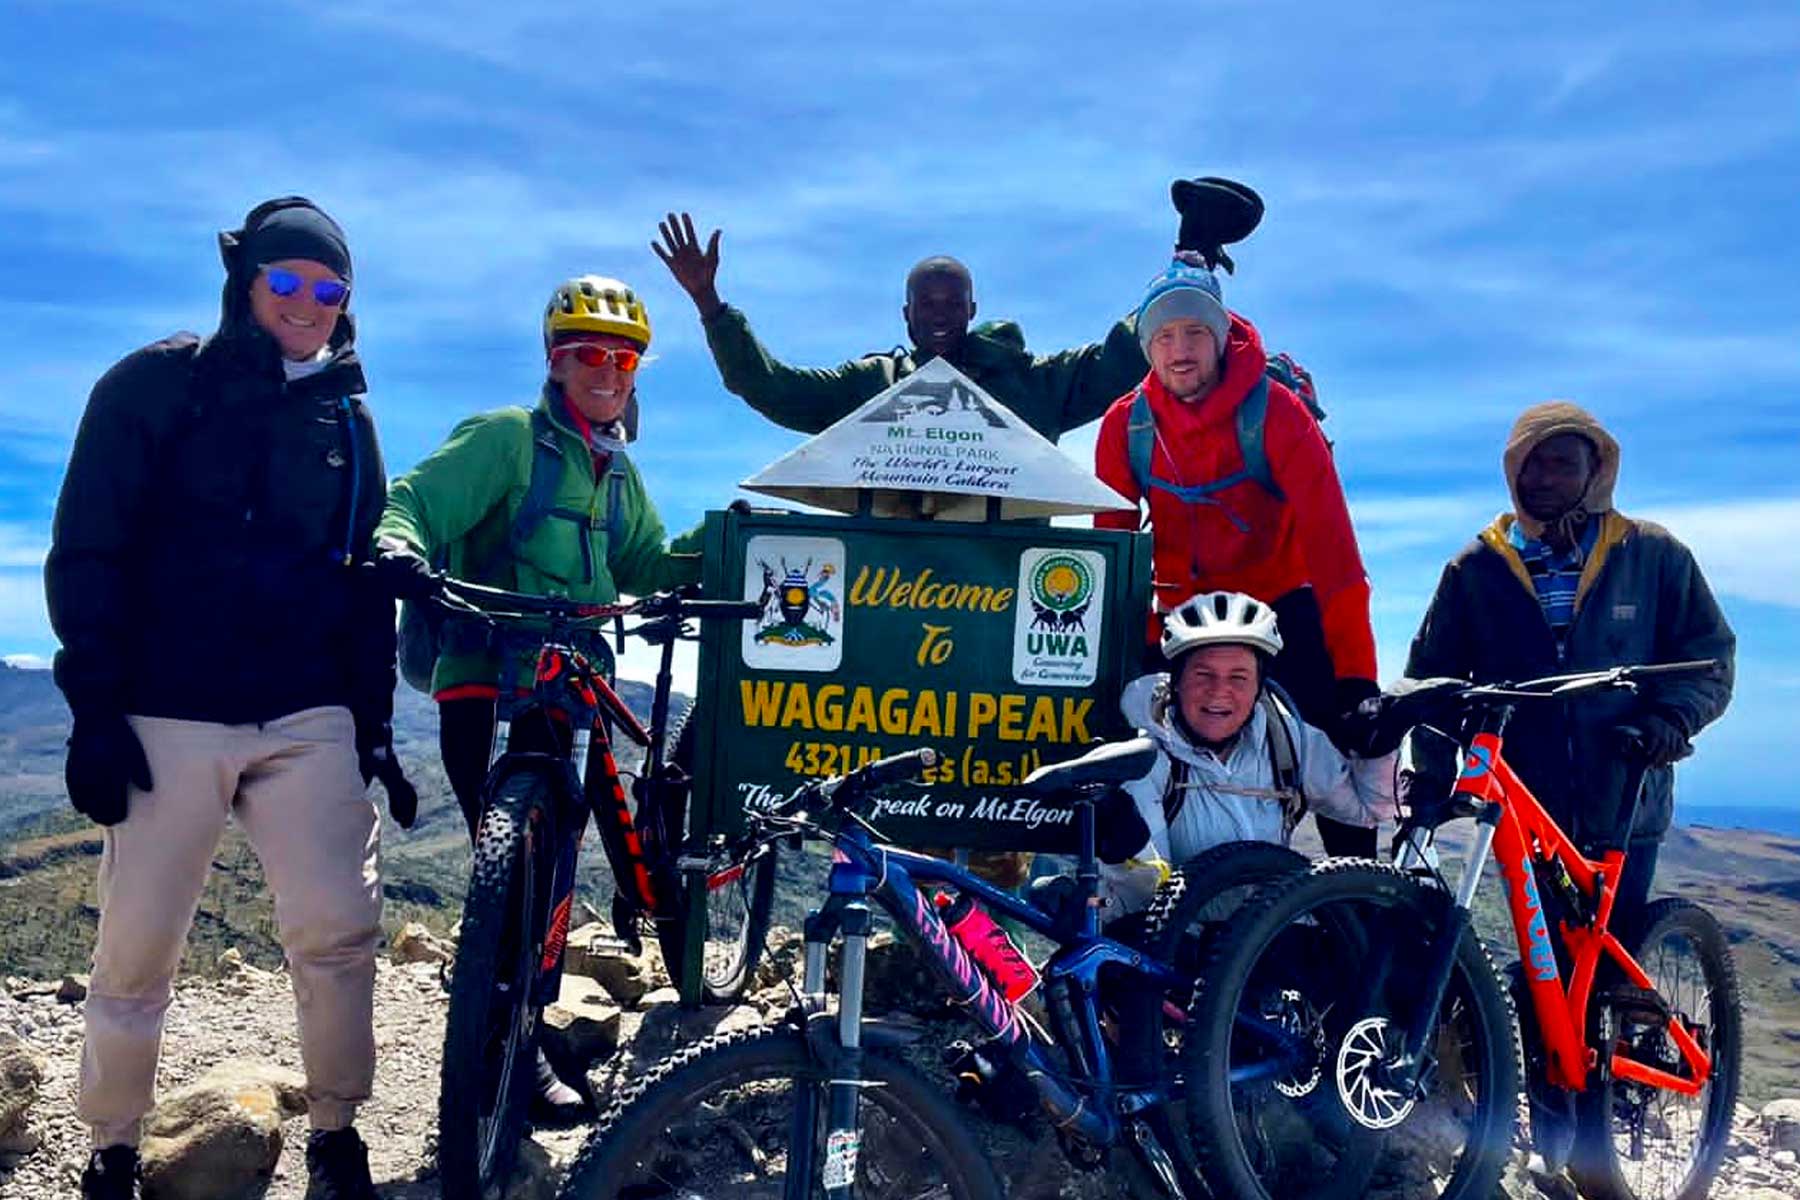 Mount Elgon Cycling Adventure Experience